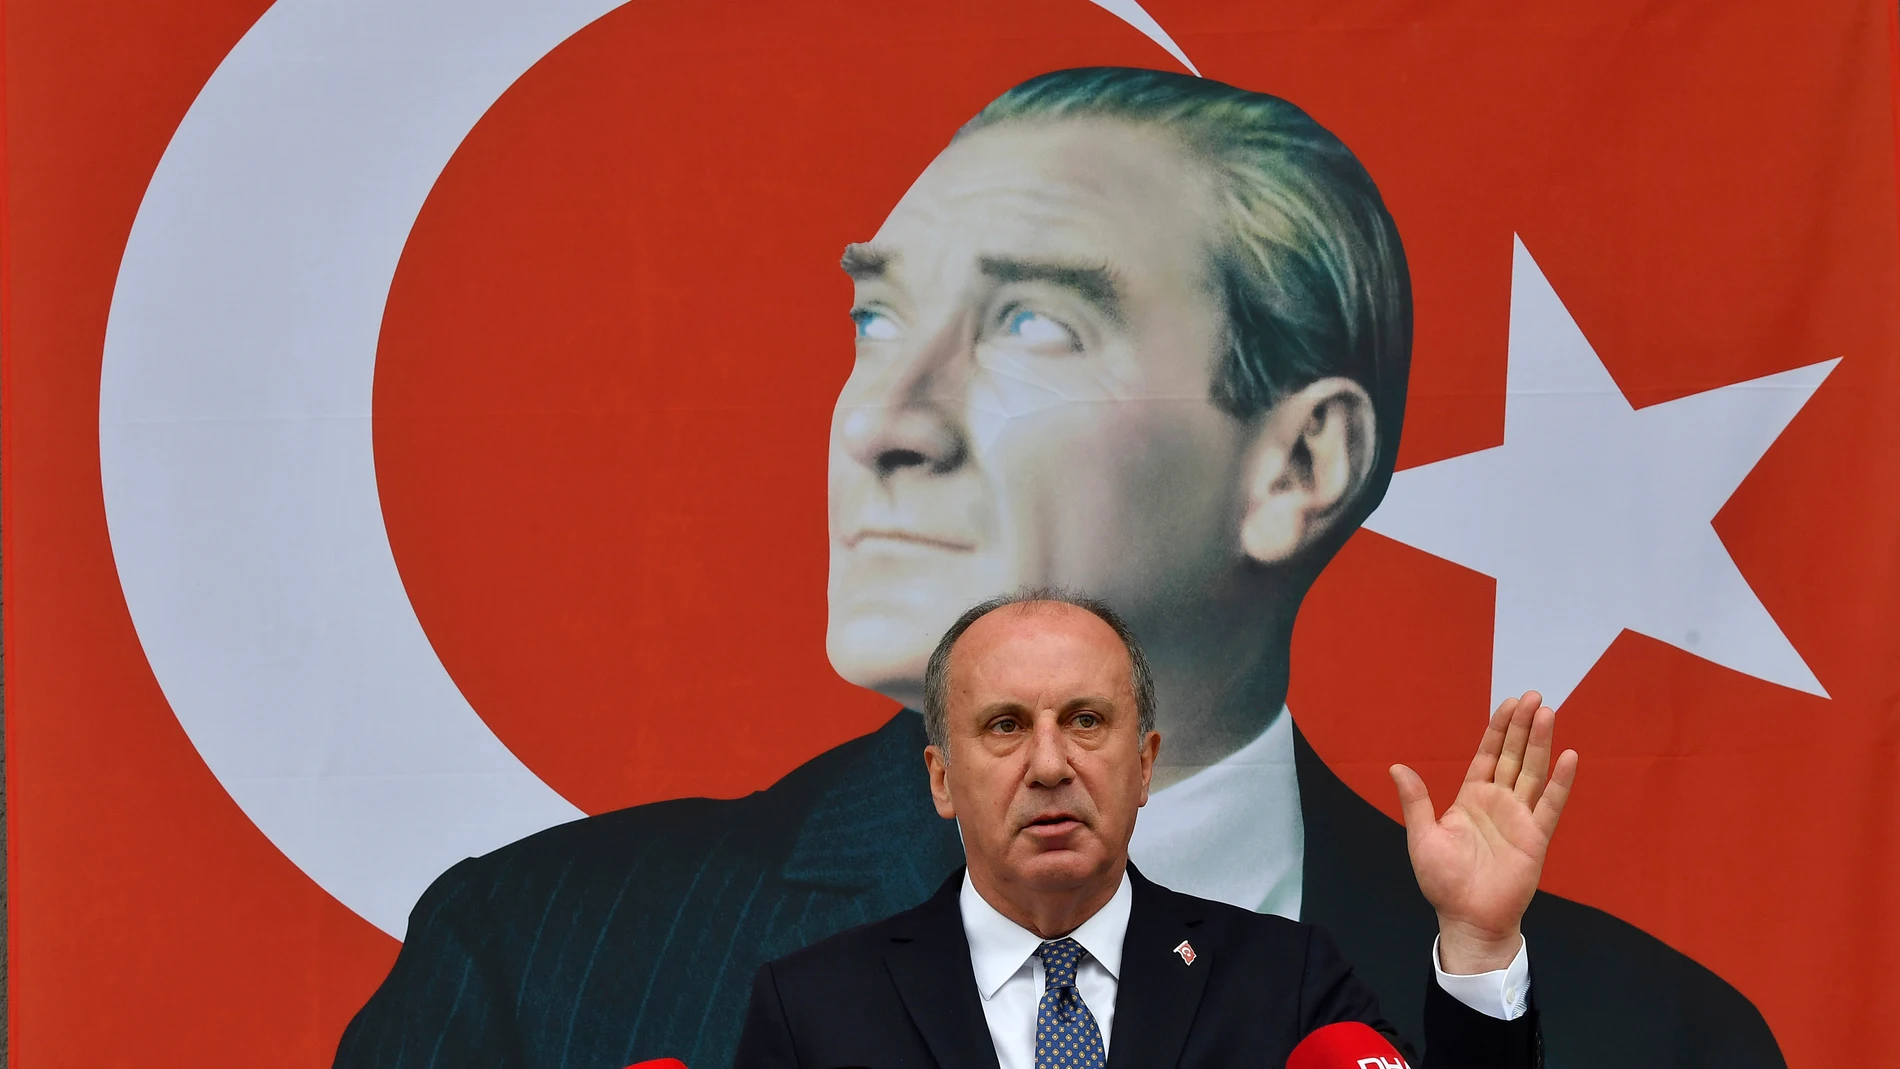 FILE - Muharrem Ince gestures as he announces his resignation from Turkey's main opposition party, CHP, during a media conference next to a poster of modern Turkey's founder, Mustafa Kemal Ataturk, in Ankara, Turkey, Monday, Feb. 8, 2021. Muharrem Ince, the leader of the center-left Homeland Party, a candidate in Sunday's elections announced Thursday, May 11, 2023 that he is withdrawing from the presidential race, in a move that is likely to bolster President Recep Tayyip Erdogan's main challenger. (AP Photo/File)